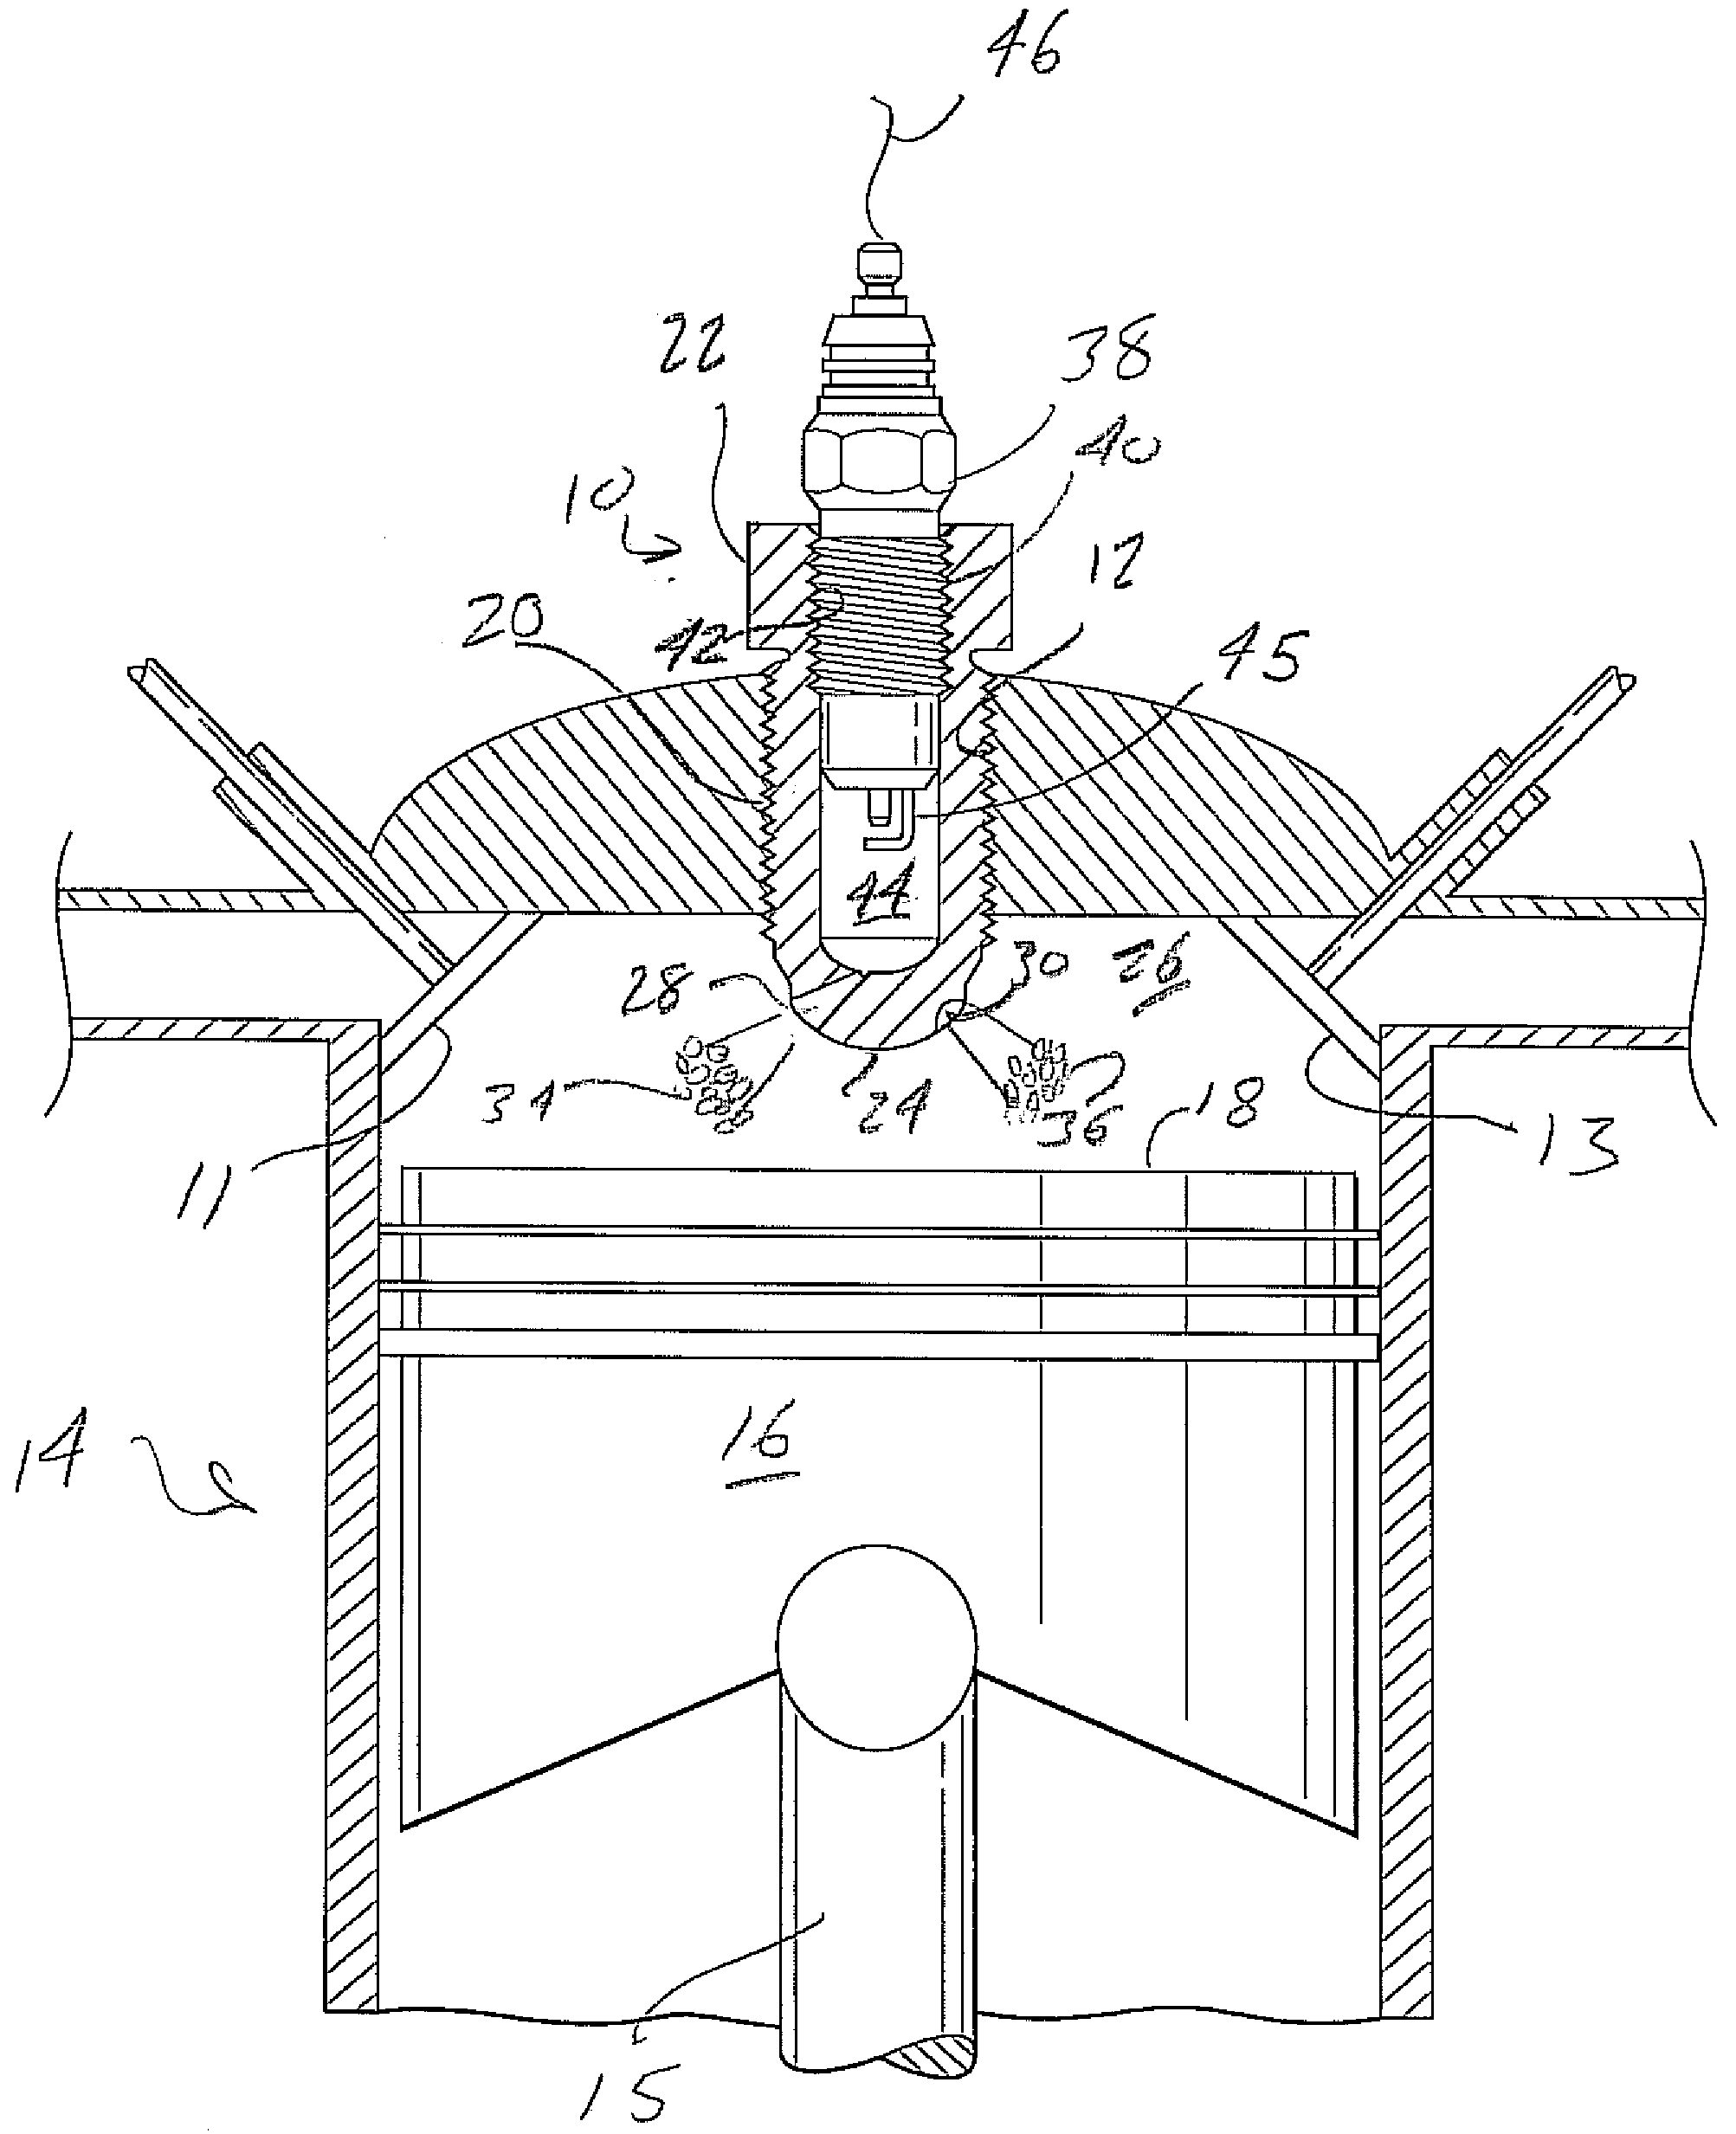 Spark to flame conversion unit, such as employed with an existing spark plug or heat source supplied glow plug for accomplishing more efficient piston combustion